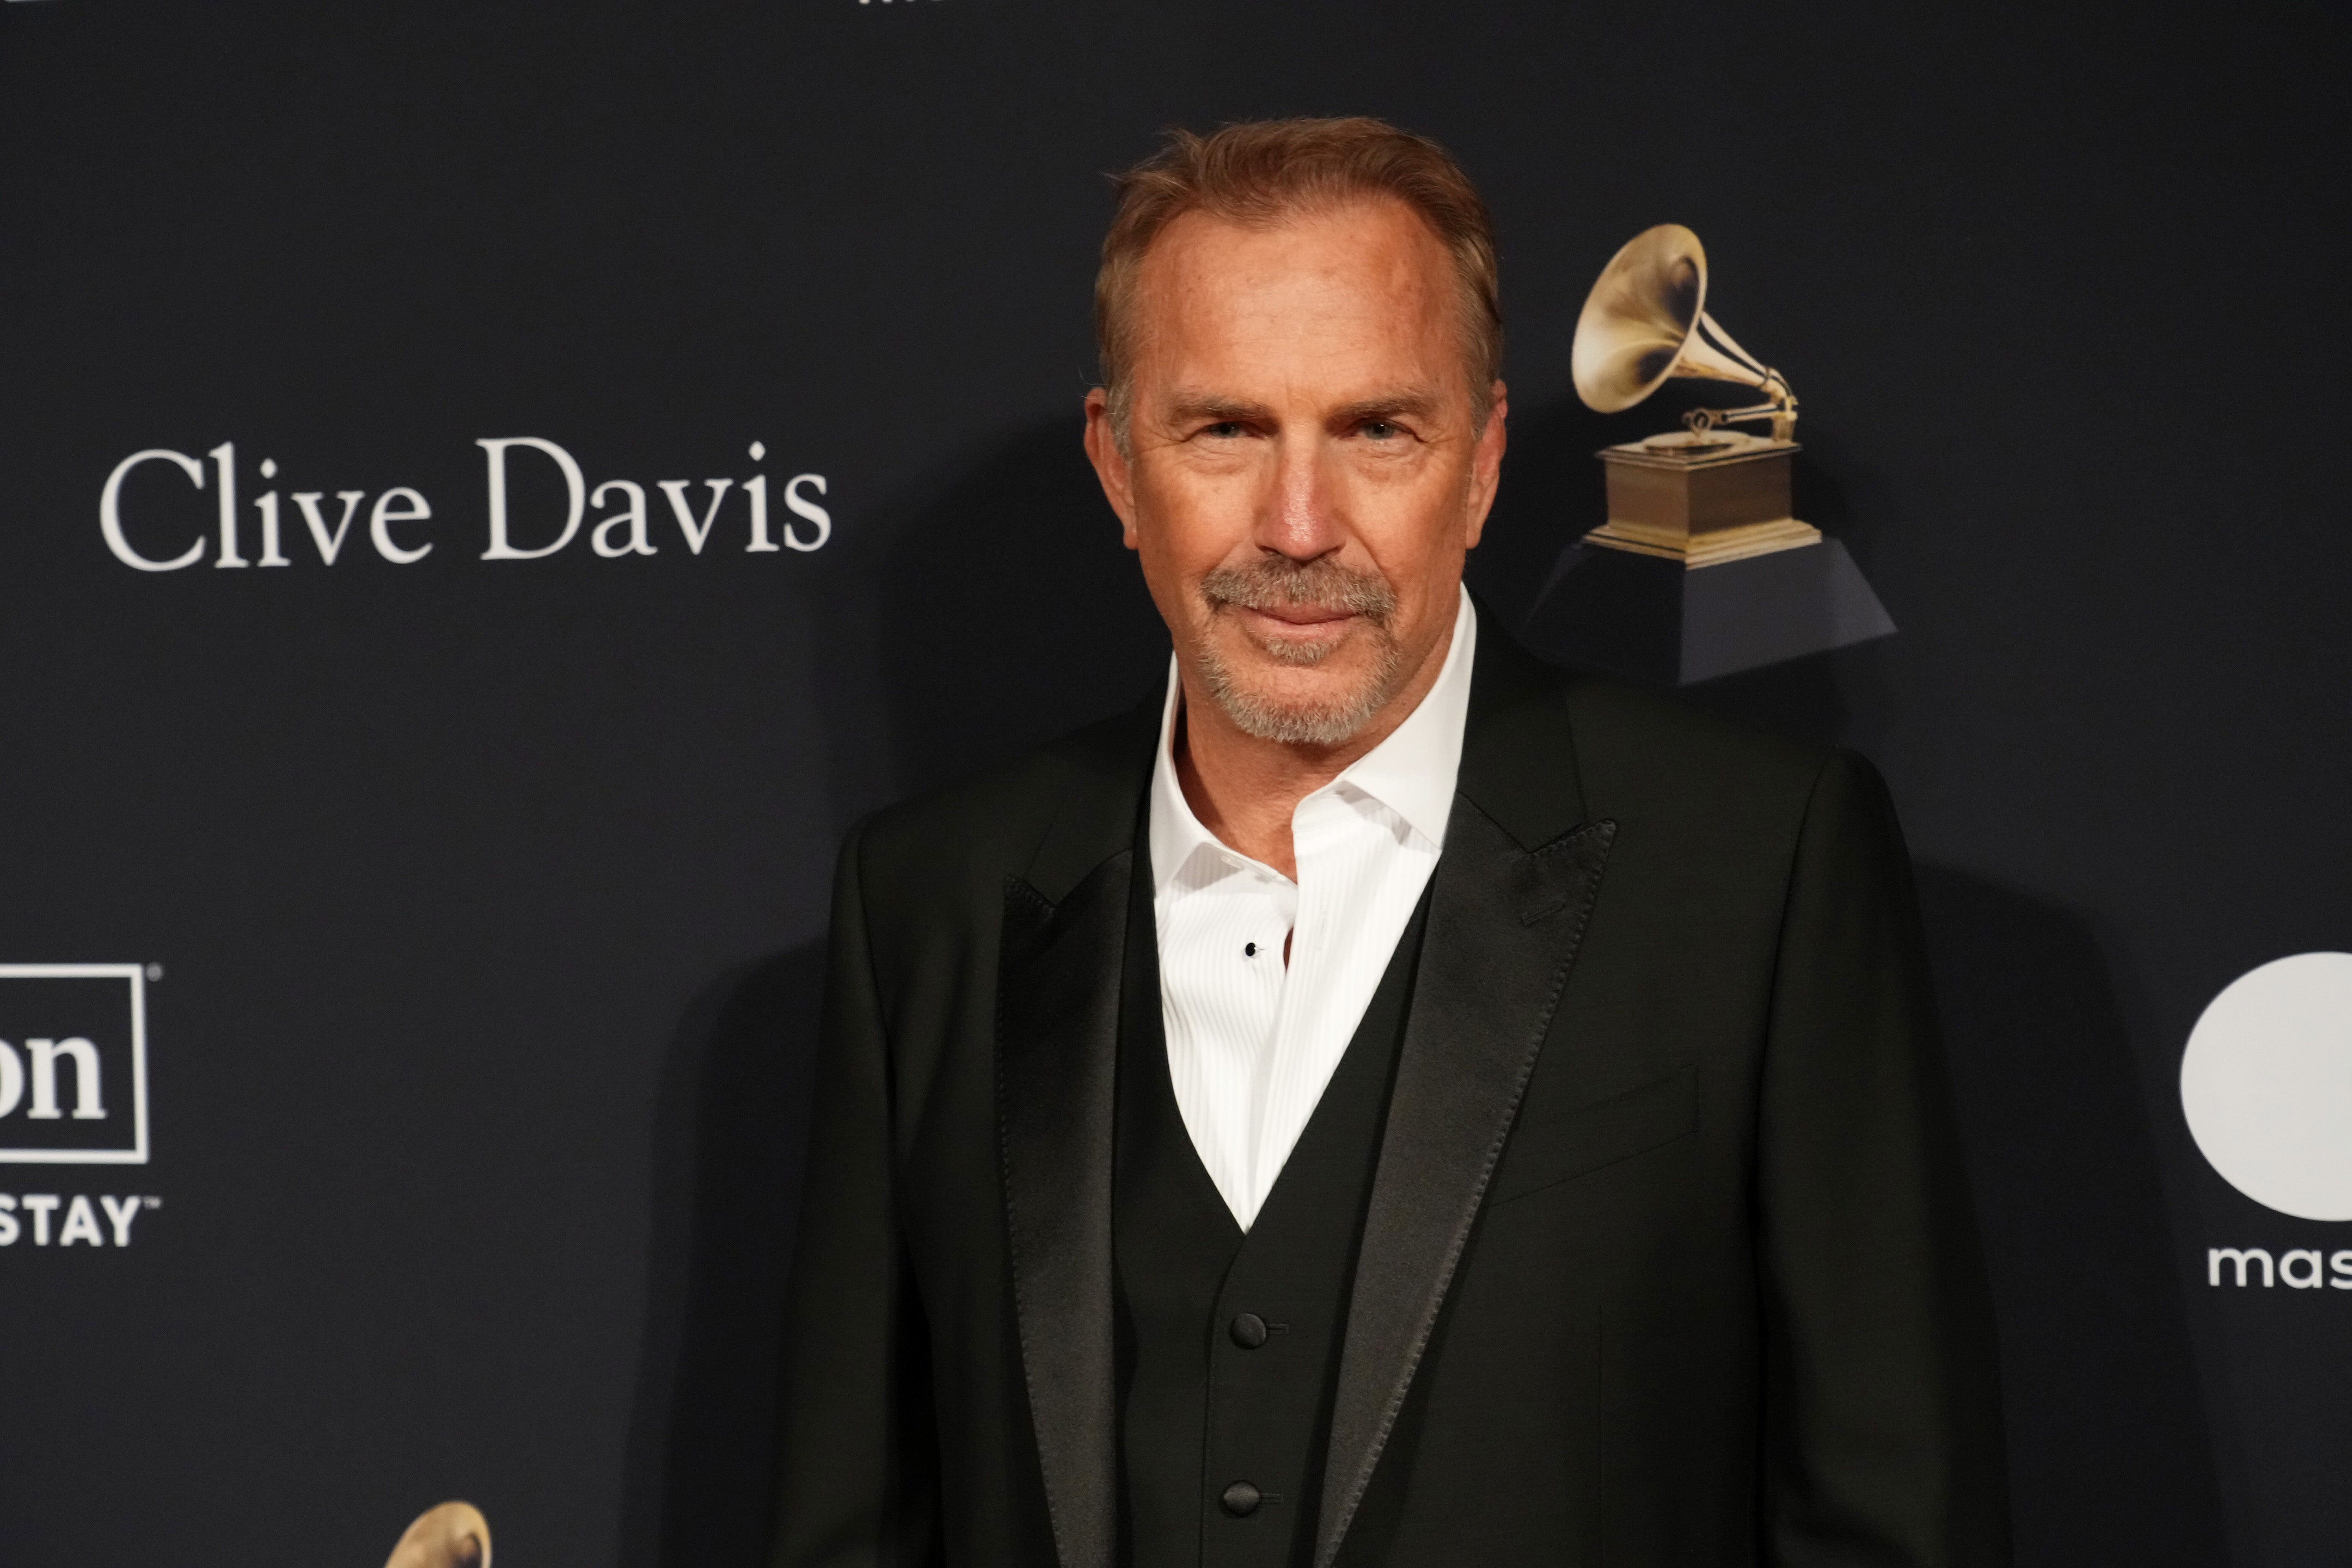 ‘Yellowstone’ star Kevin Costner talks falling ‘short’ but says ‘we keep on trying’